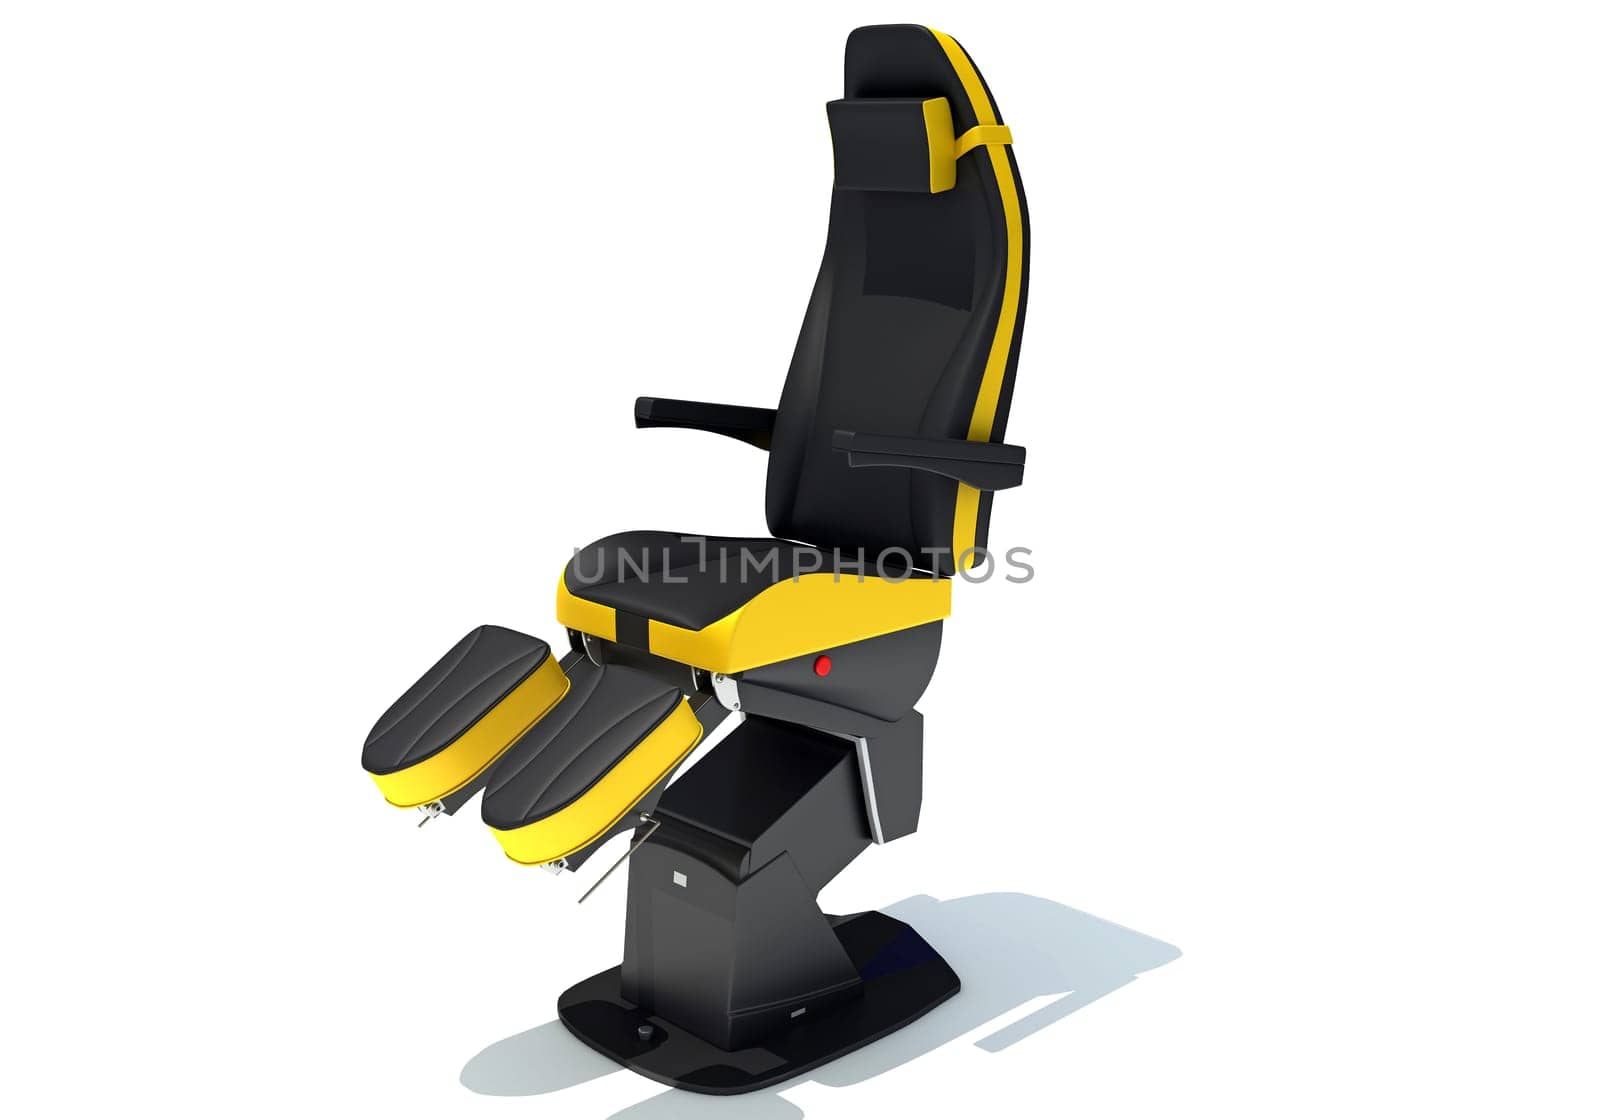 Medical Examination Chair medical equipment 3D rendering model on white background